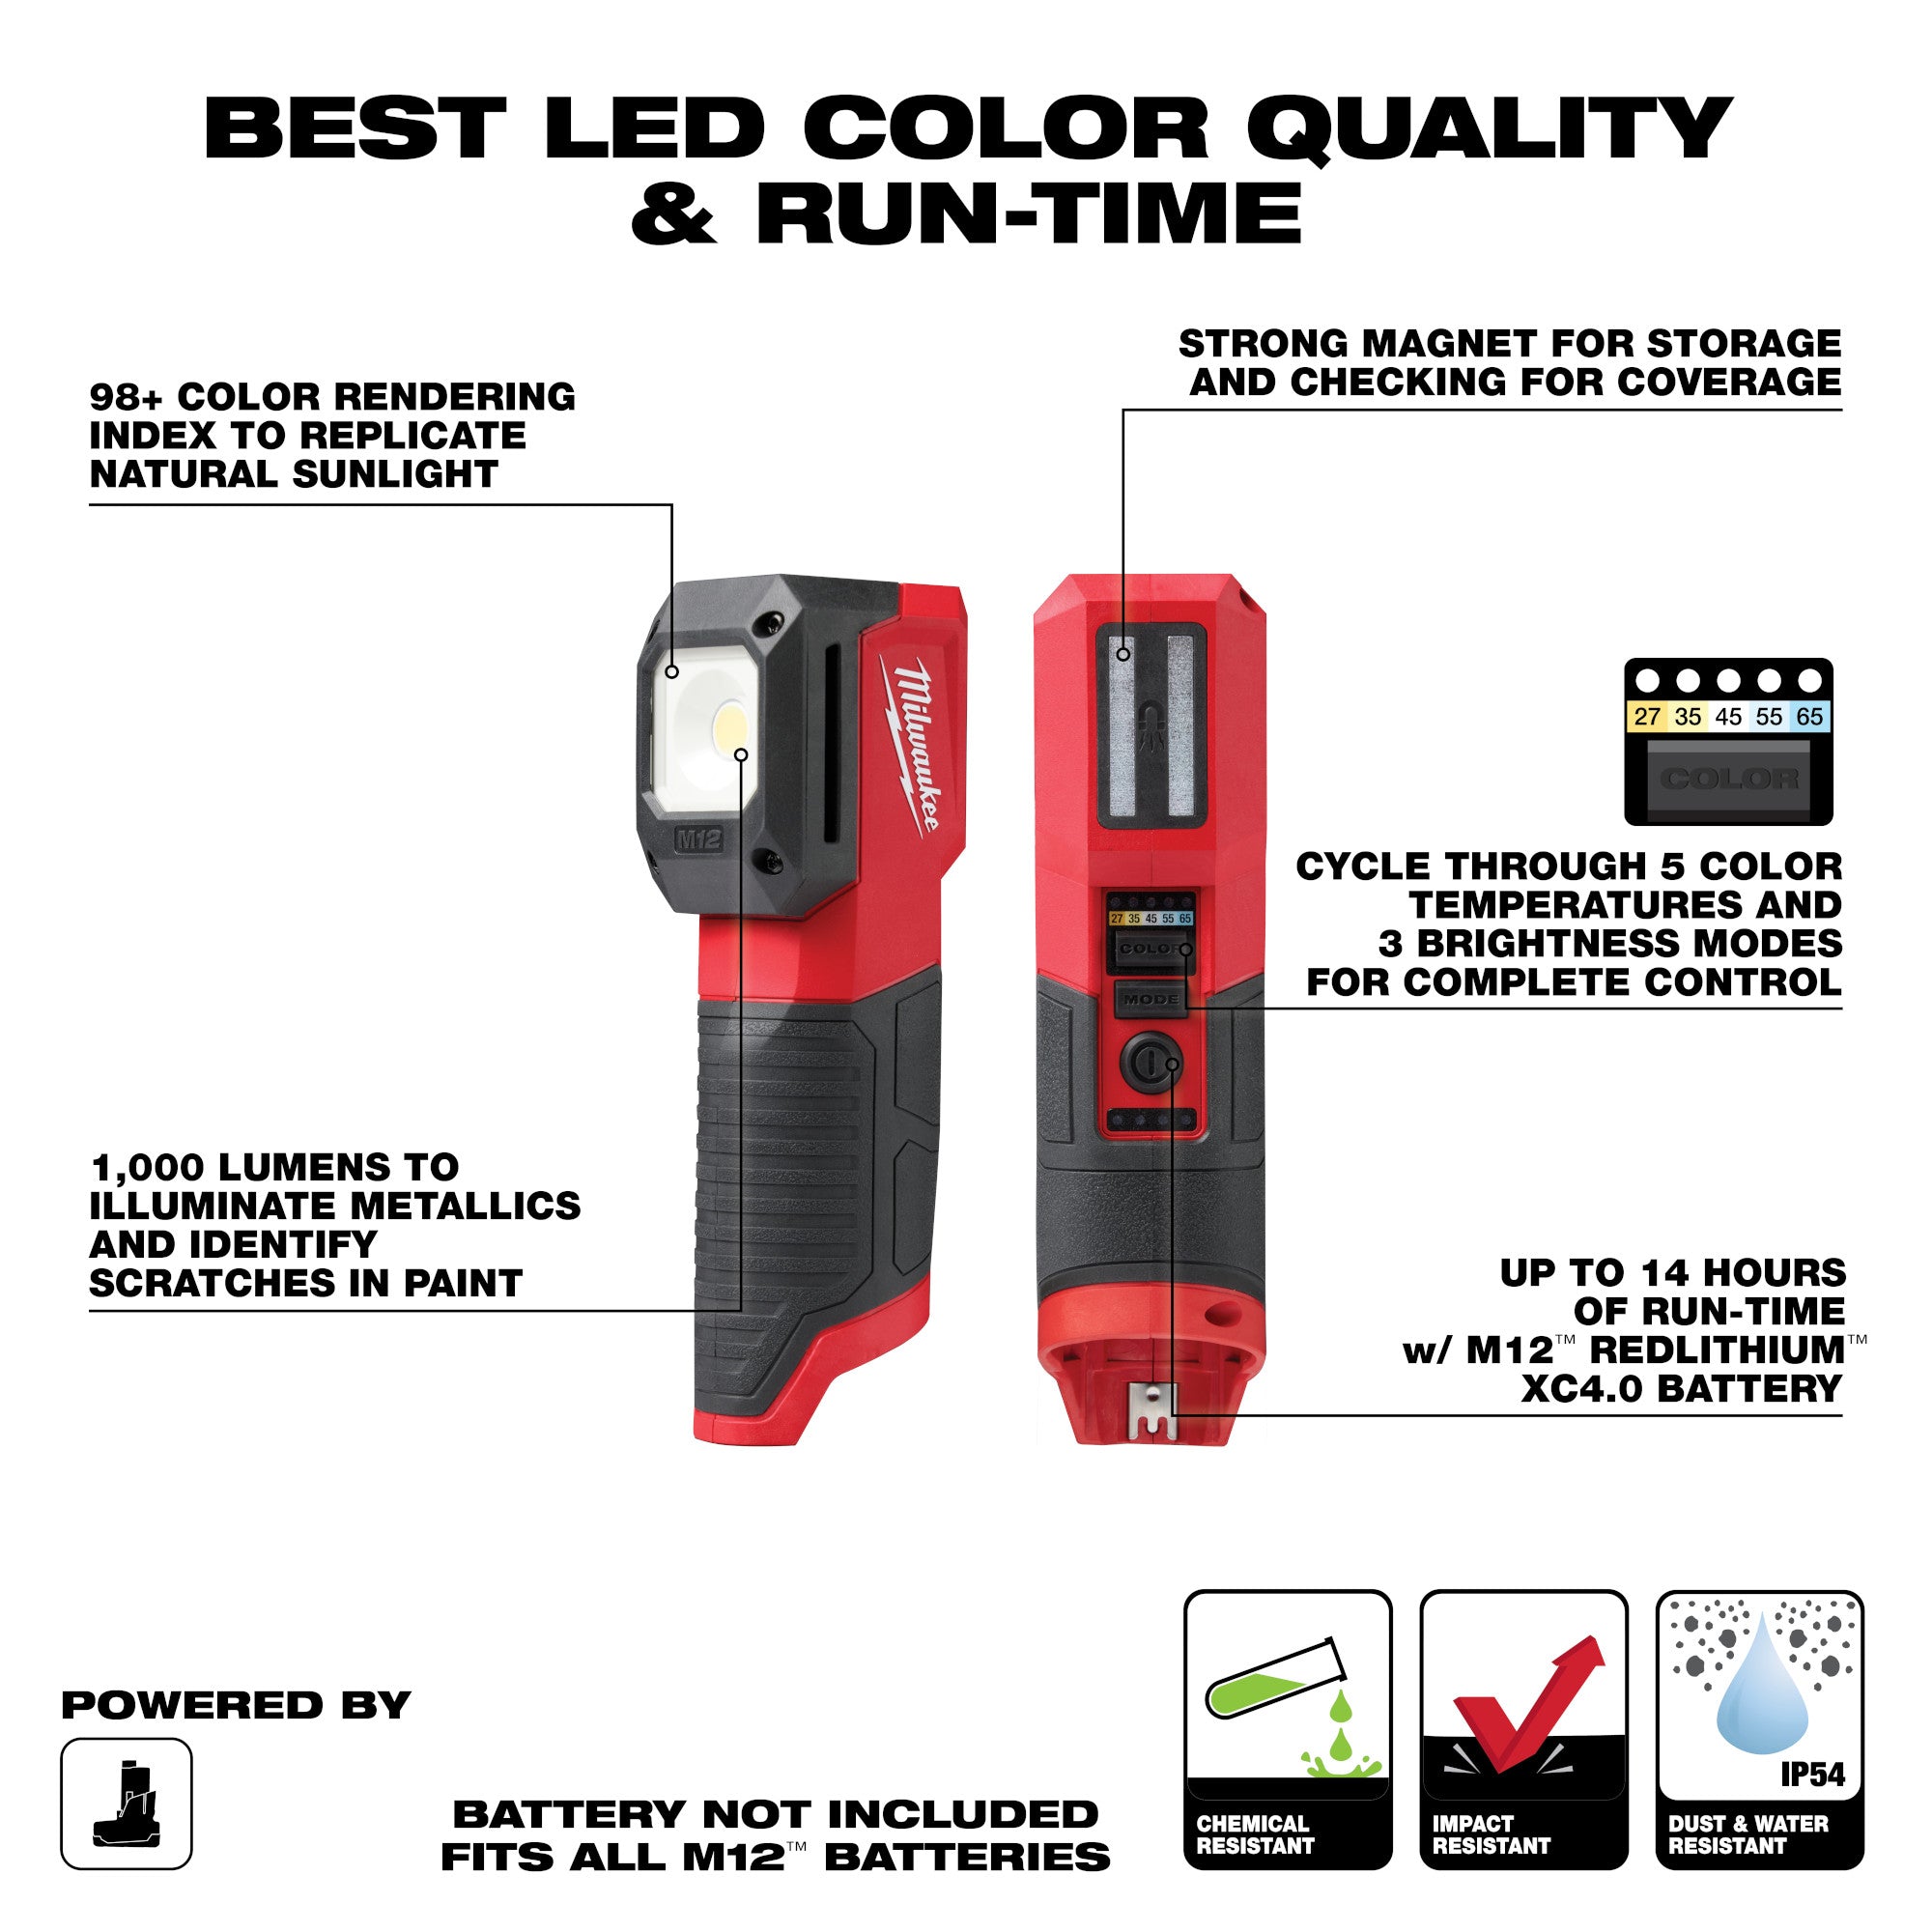 12V M12 Lithium-Ion Cordless Paint and Detailing Color Match Light (Tool Only)